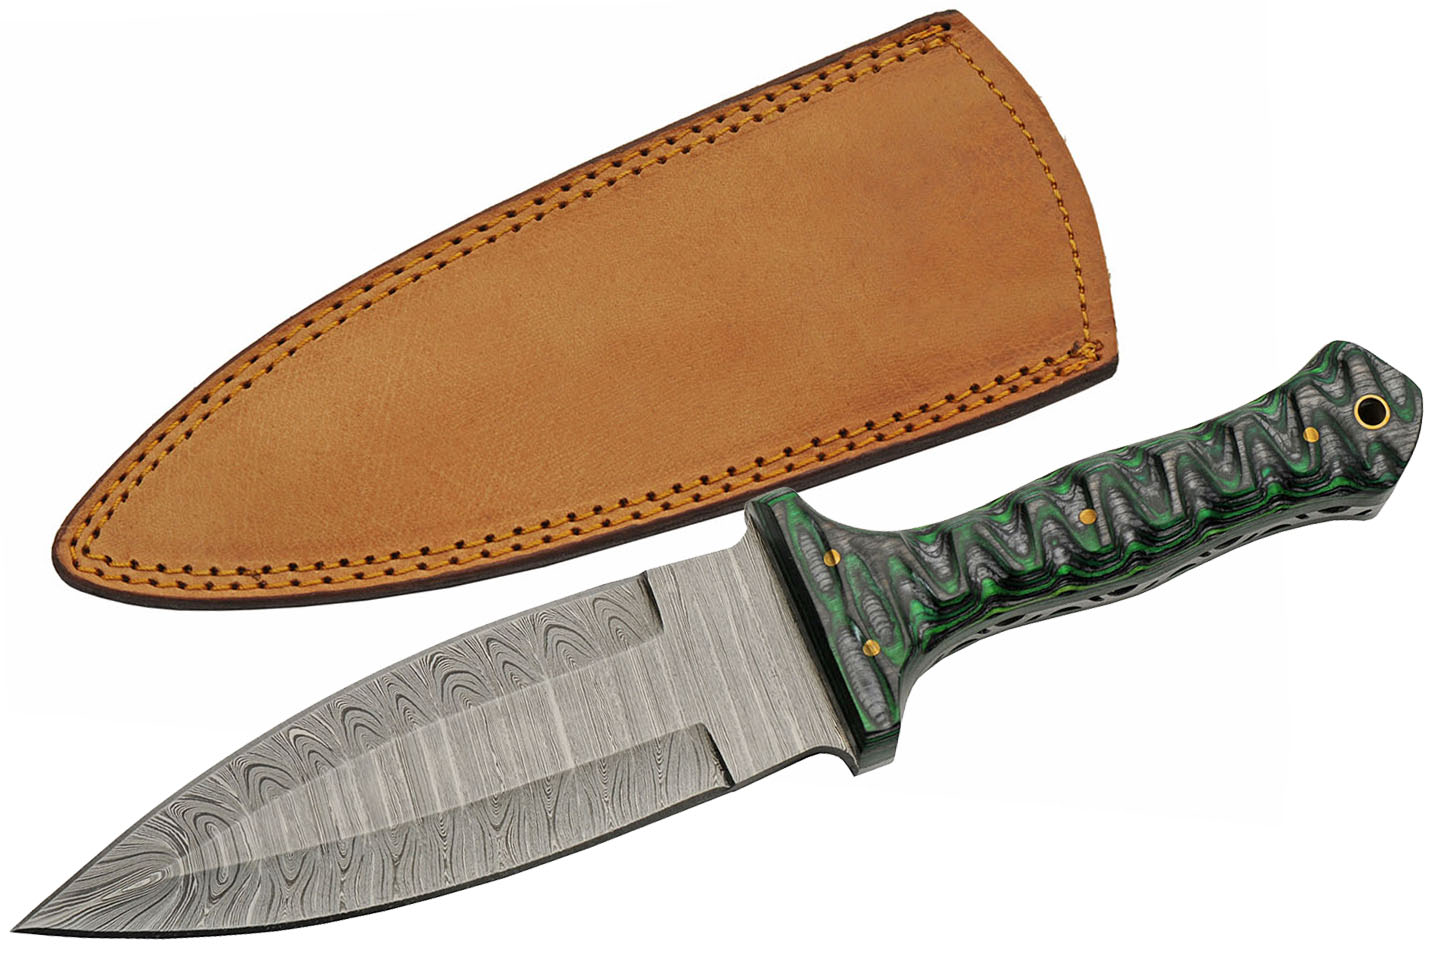 Green Damascus Steel Blade | Grooved Wood Handle 10.5 inch Edc Hunting ...